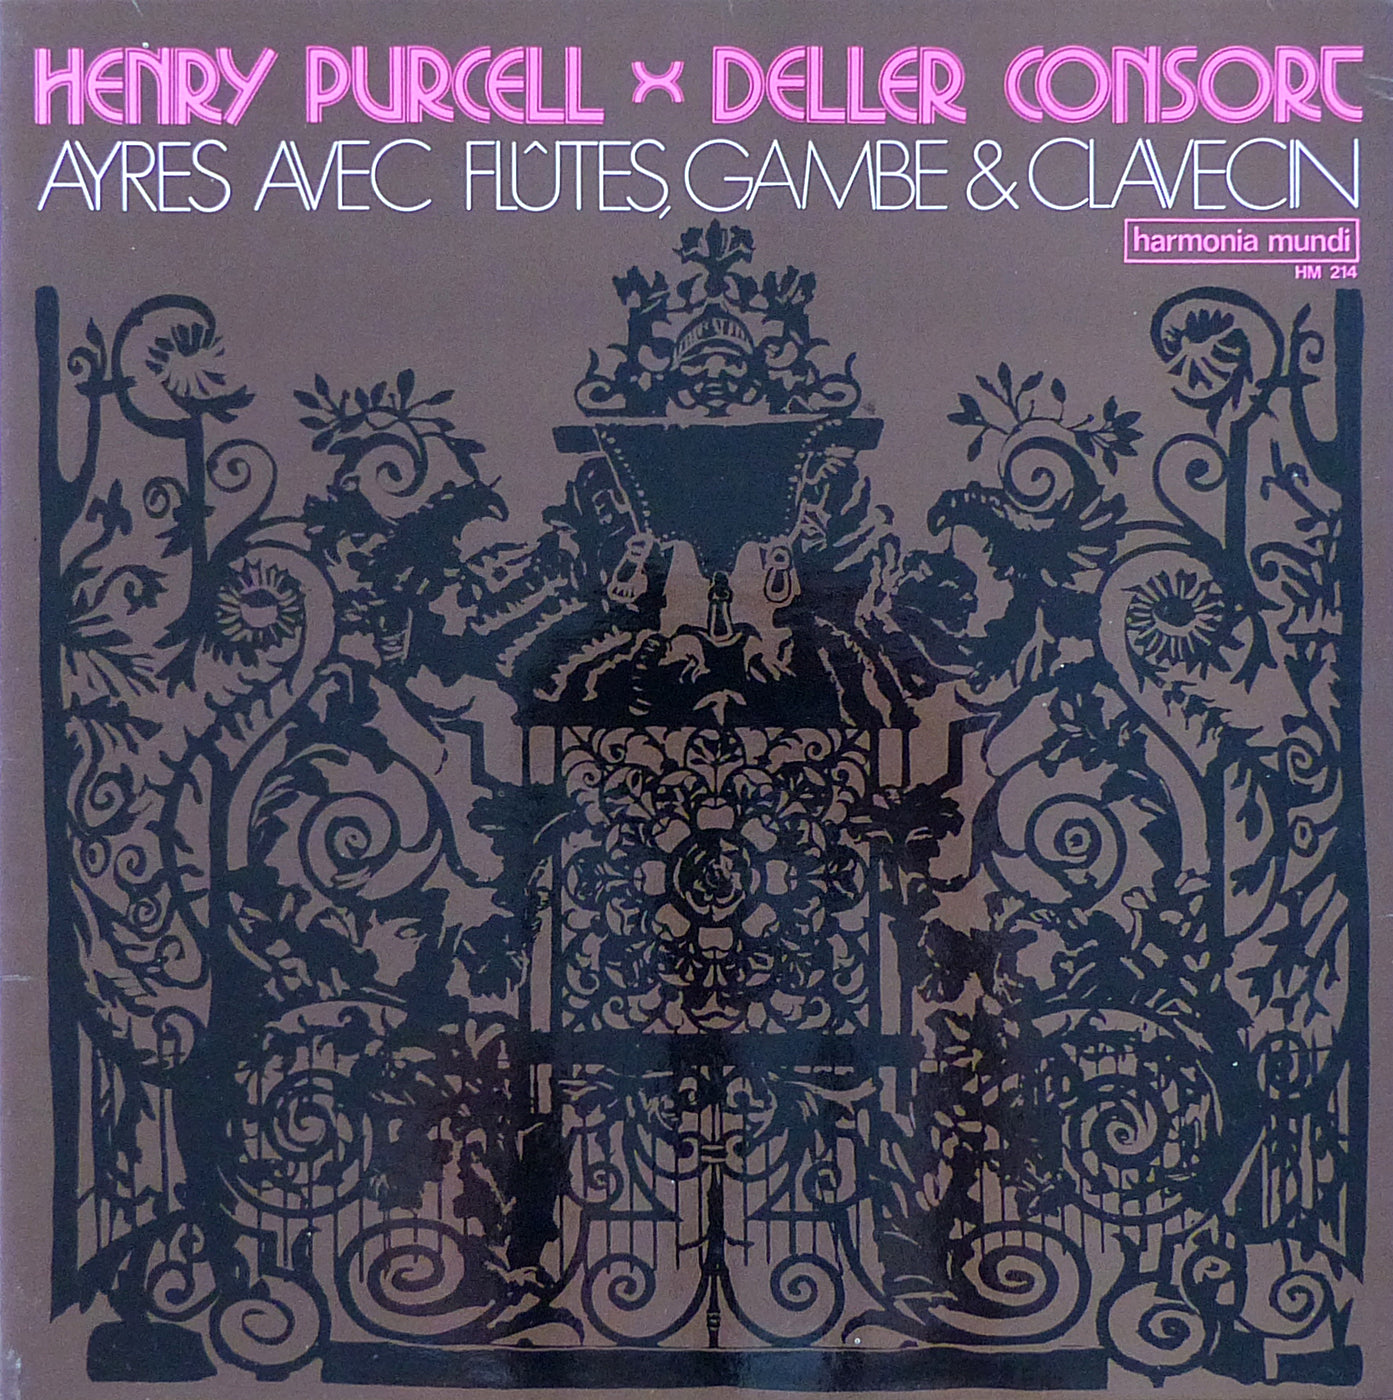 Deller Consort: Purcell Ayres with Flutes